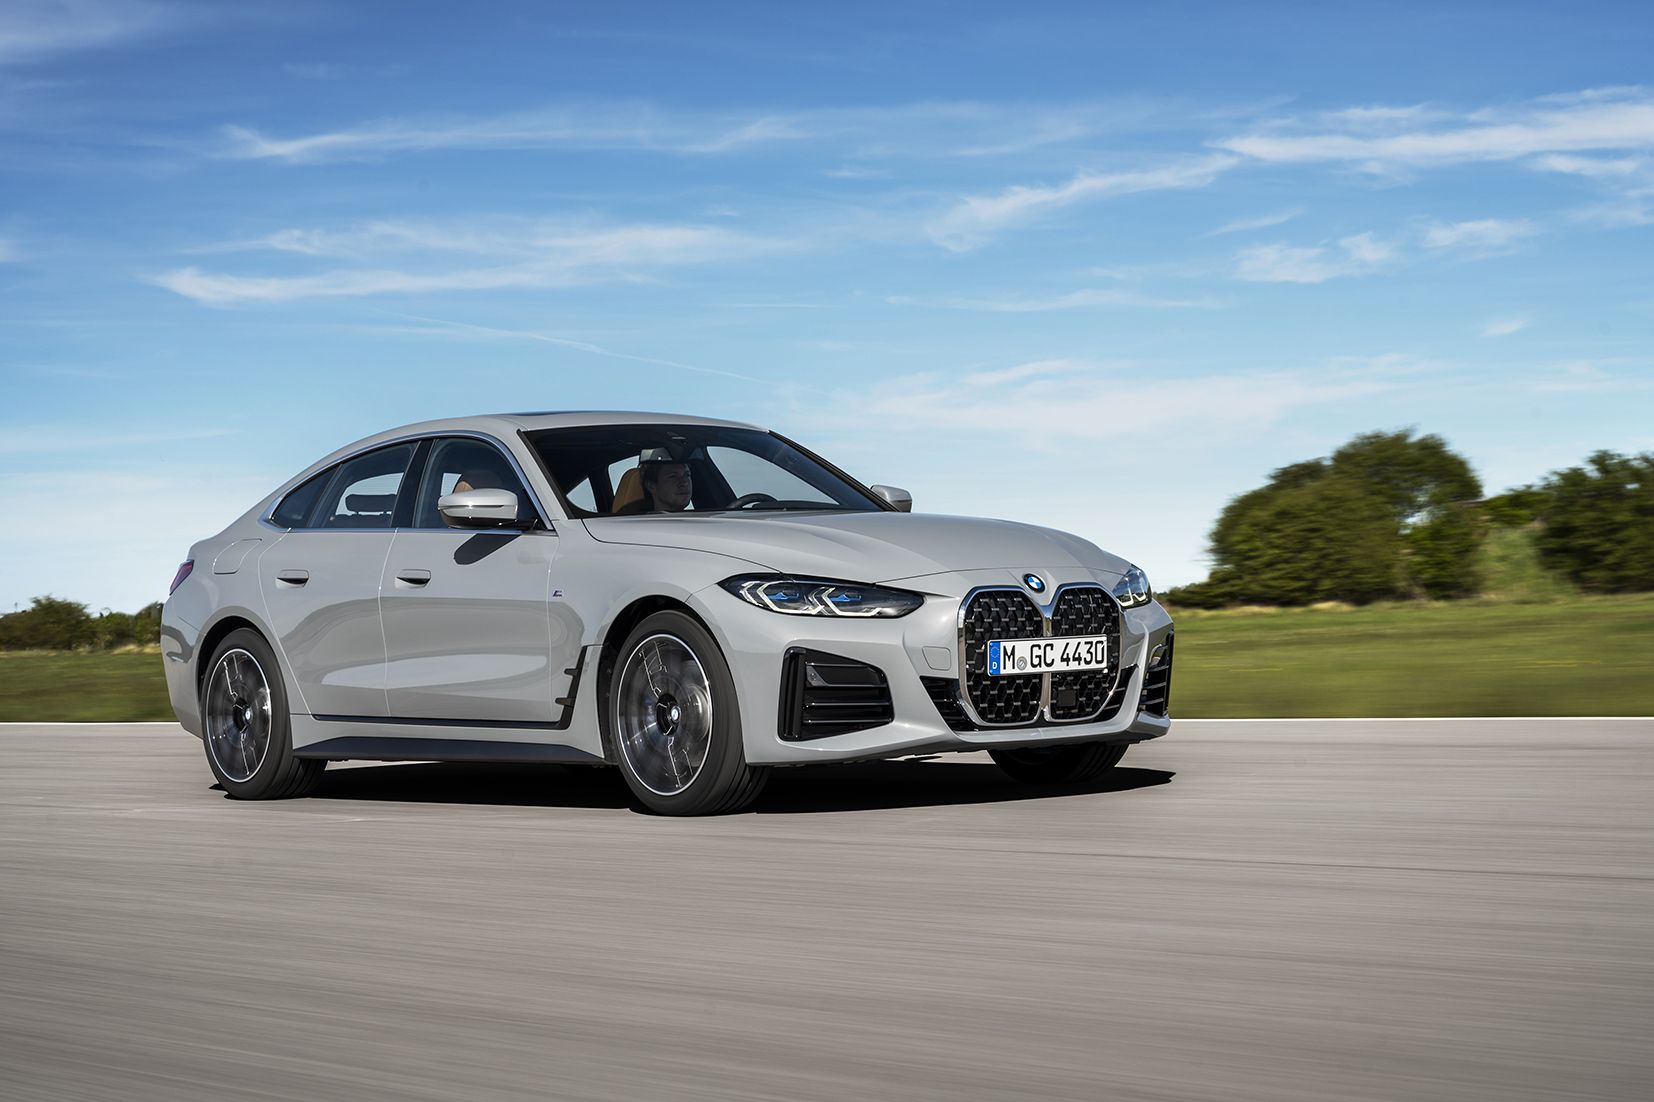 2022 BMW 4 Series Gran Coupe - Full Image Gallery